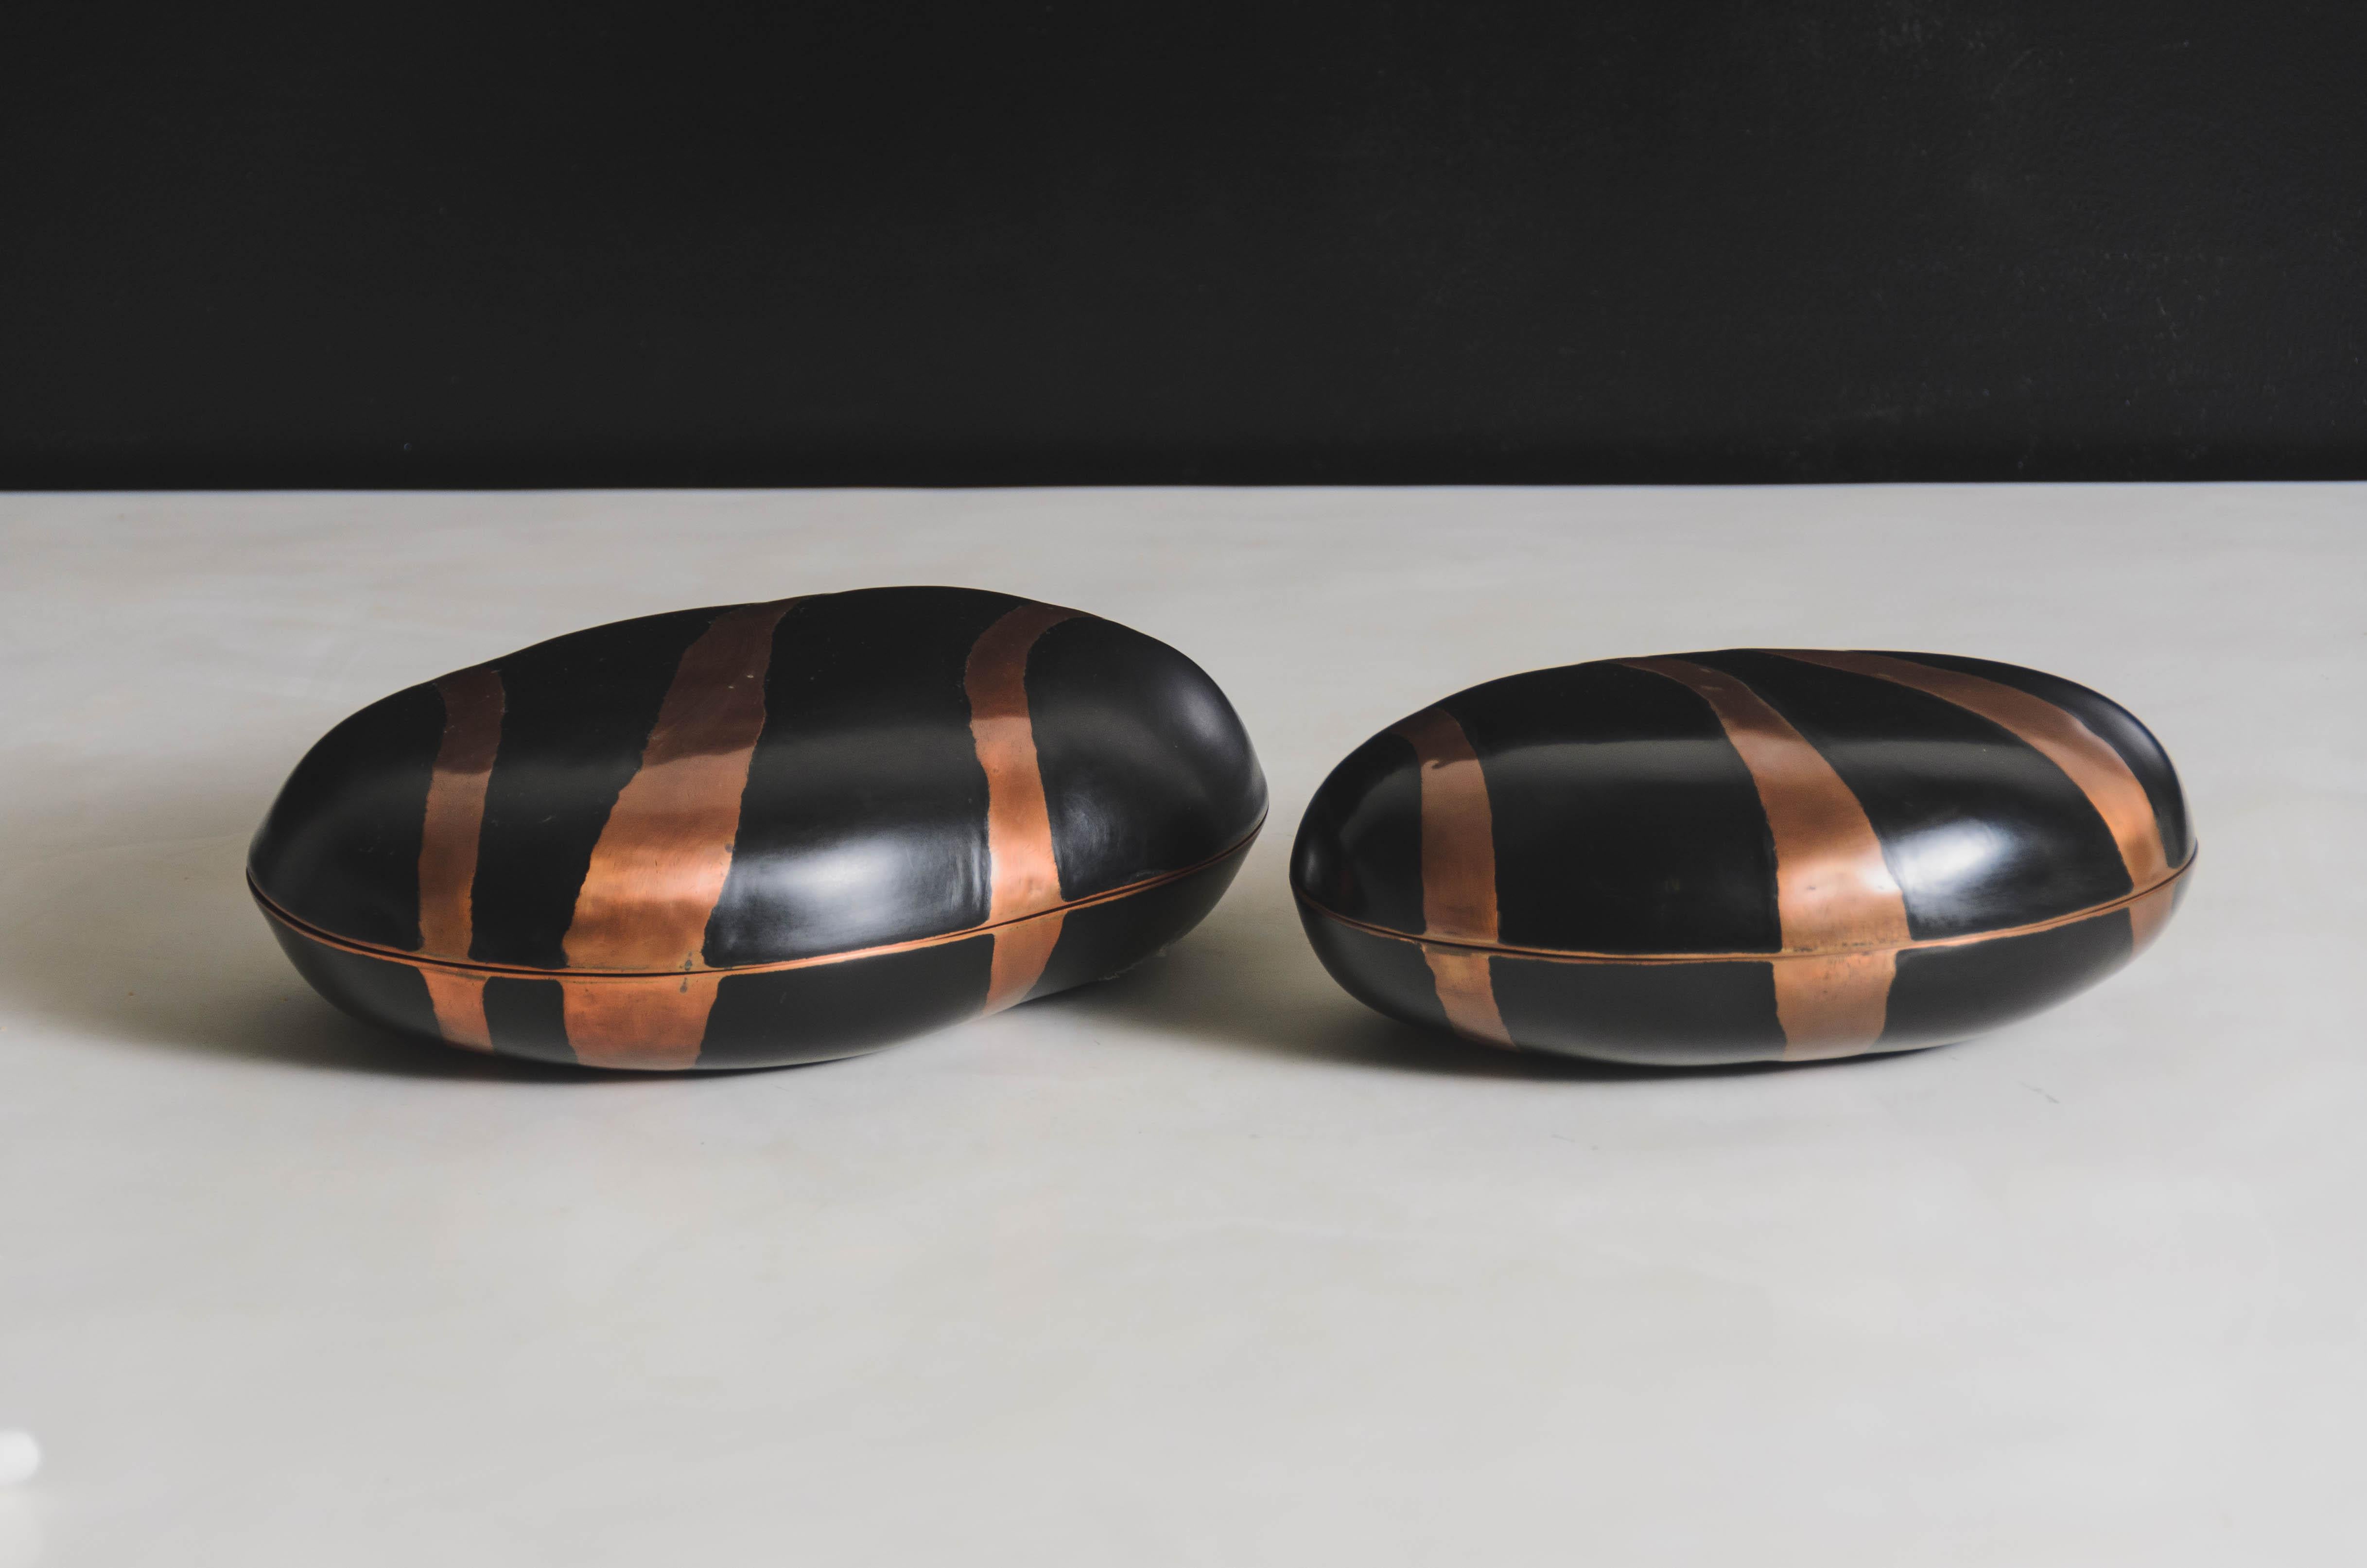 Contemporary Zebra Box in Black Lacquer and Copper by Robert Kuo, Hand Repoussé, Limited For Sale